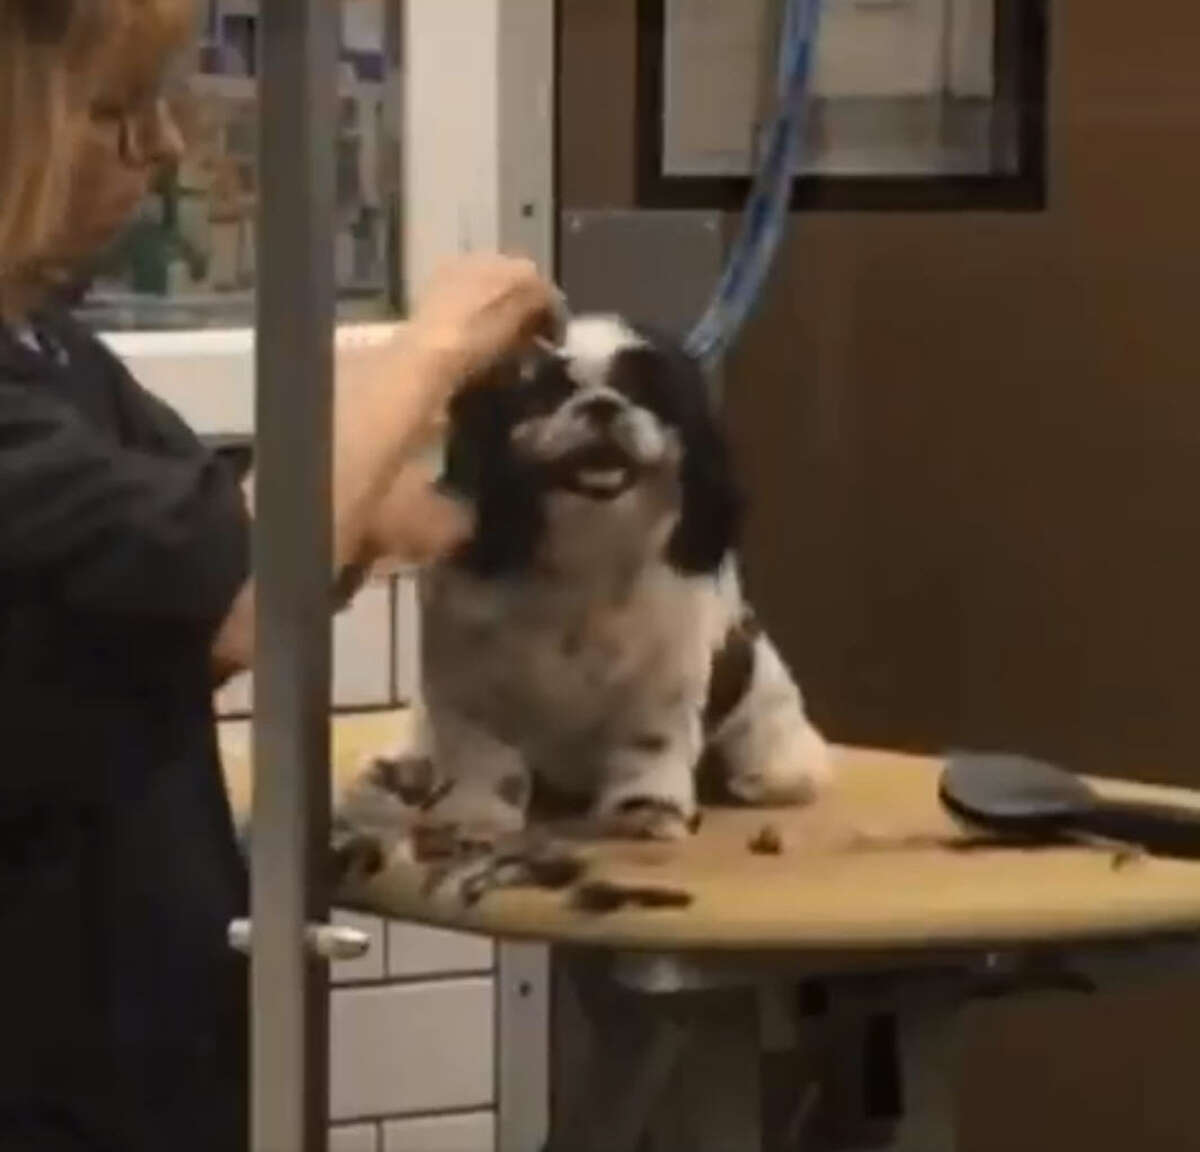 A PetSmart groomer in Katy has been fired after she was captured on video Thursday violently tending to a small dog.